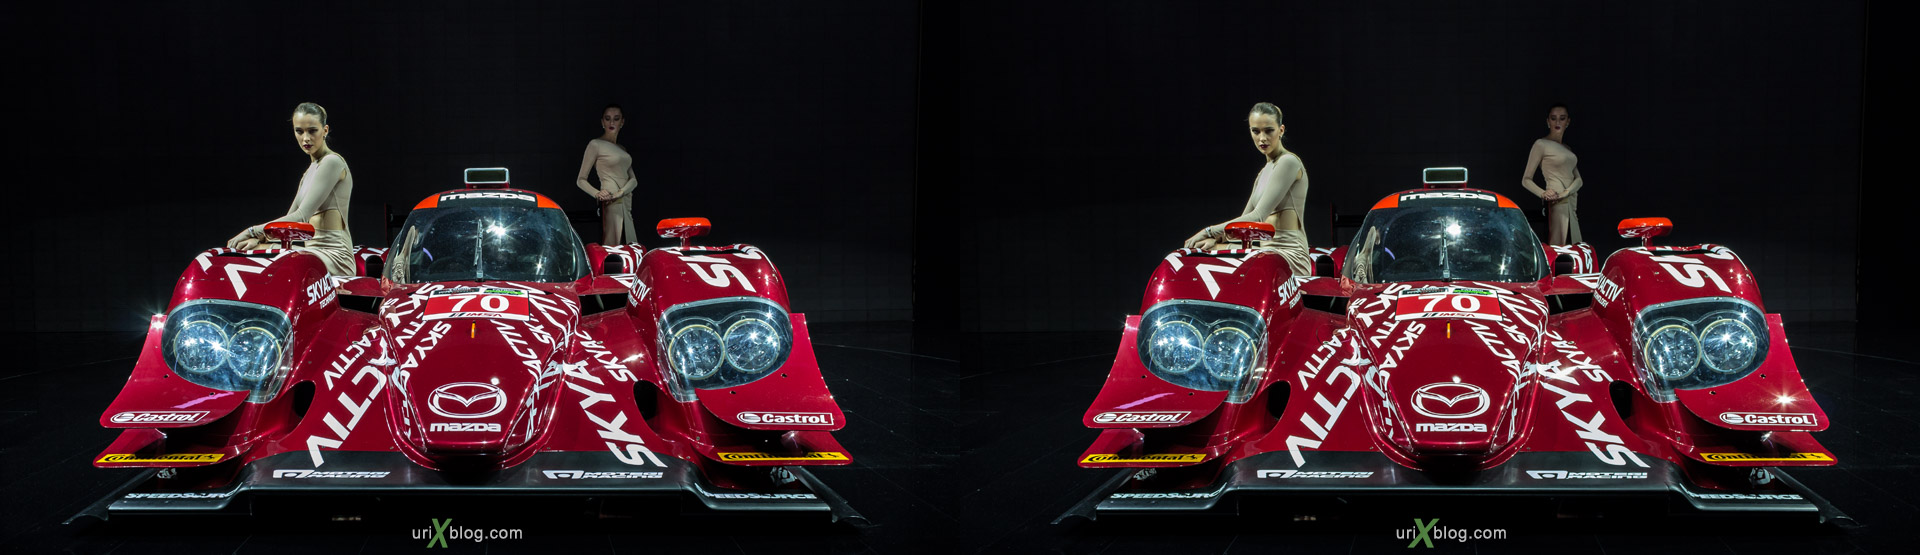 2014, Mazda, Moscow International Automobile Salon, MIAS, Crocus Expo, models, girls, Moscow, Russia, augest, 3D, stereo pair, cross-eyed, crossview, cross view stereo pair, stereoscopic